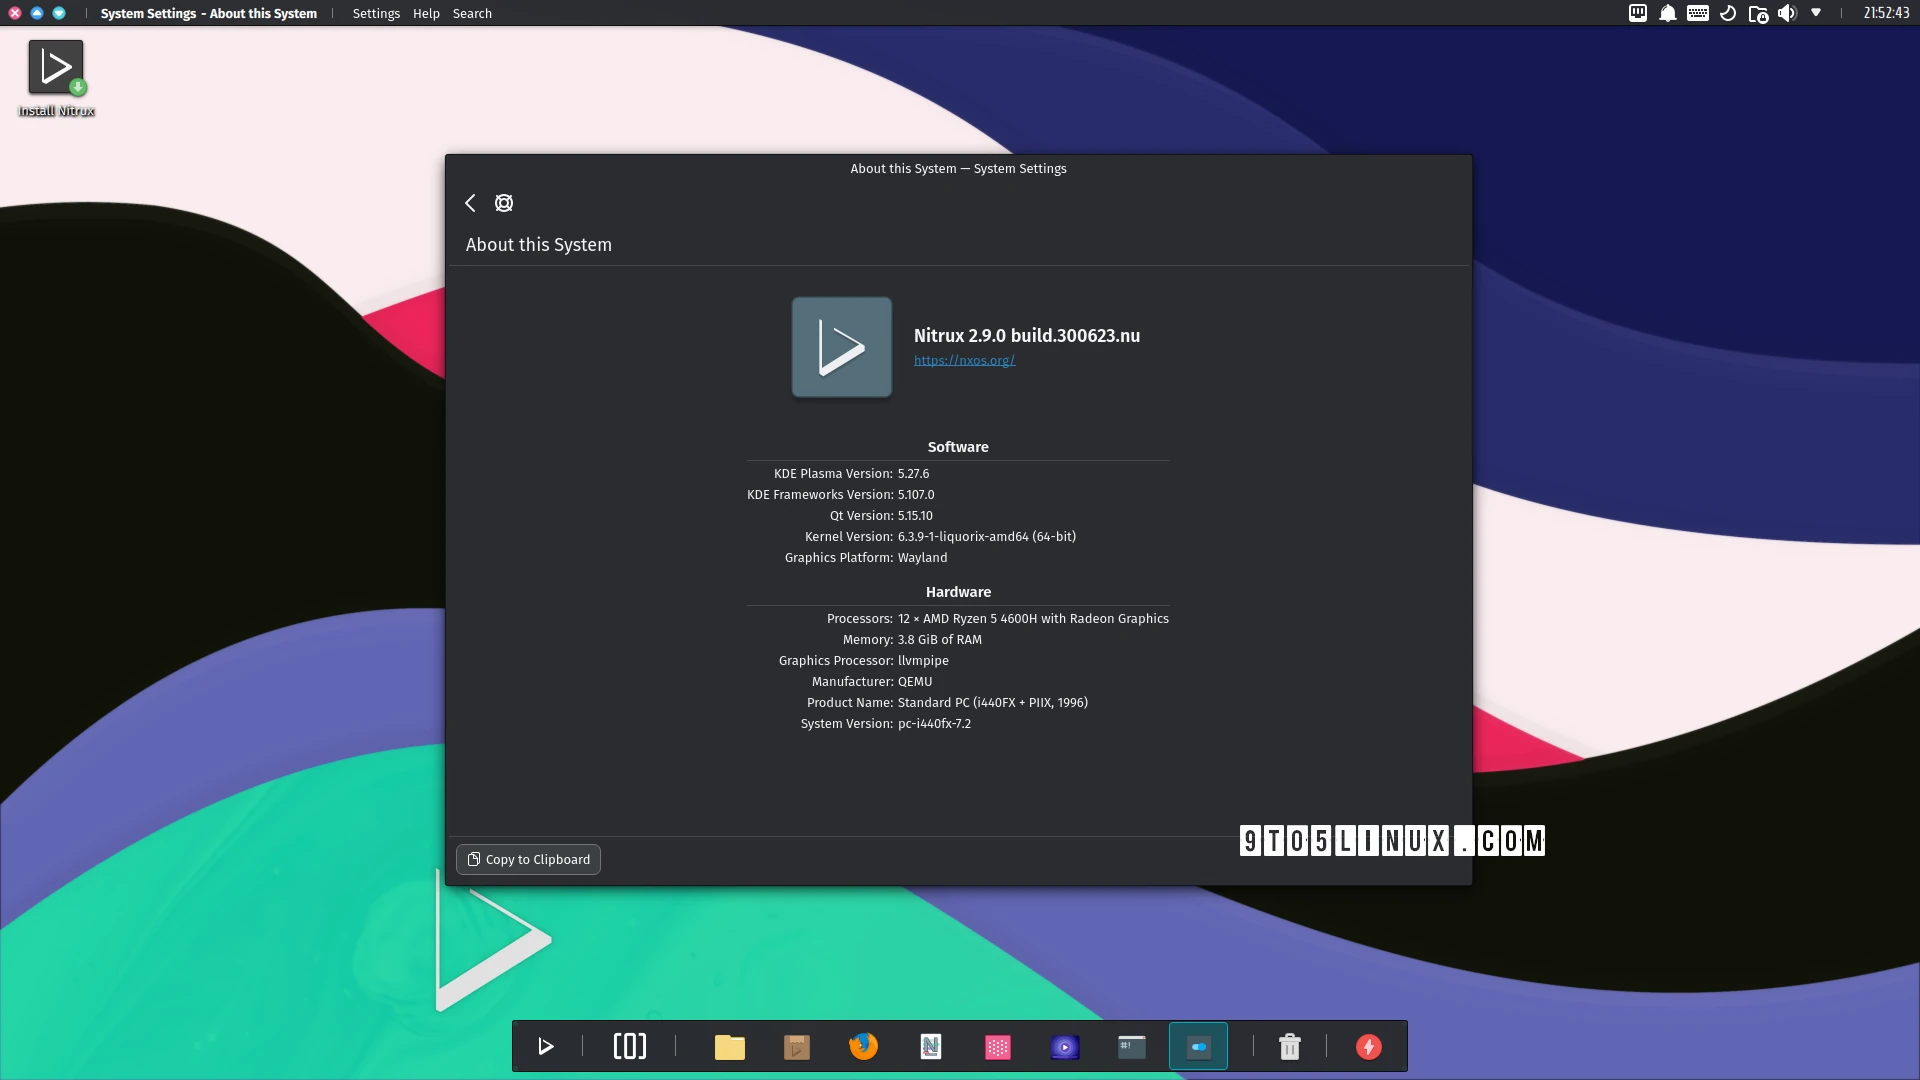 Nitrux 2.9 Released with New Upgrade Tool, Latest KDE Software, and Much More